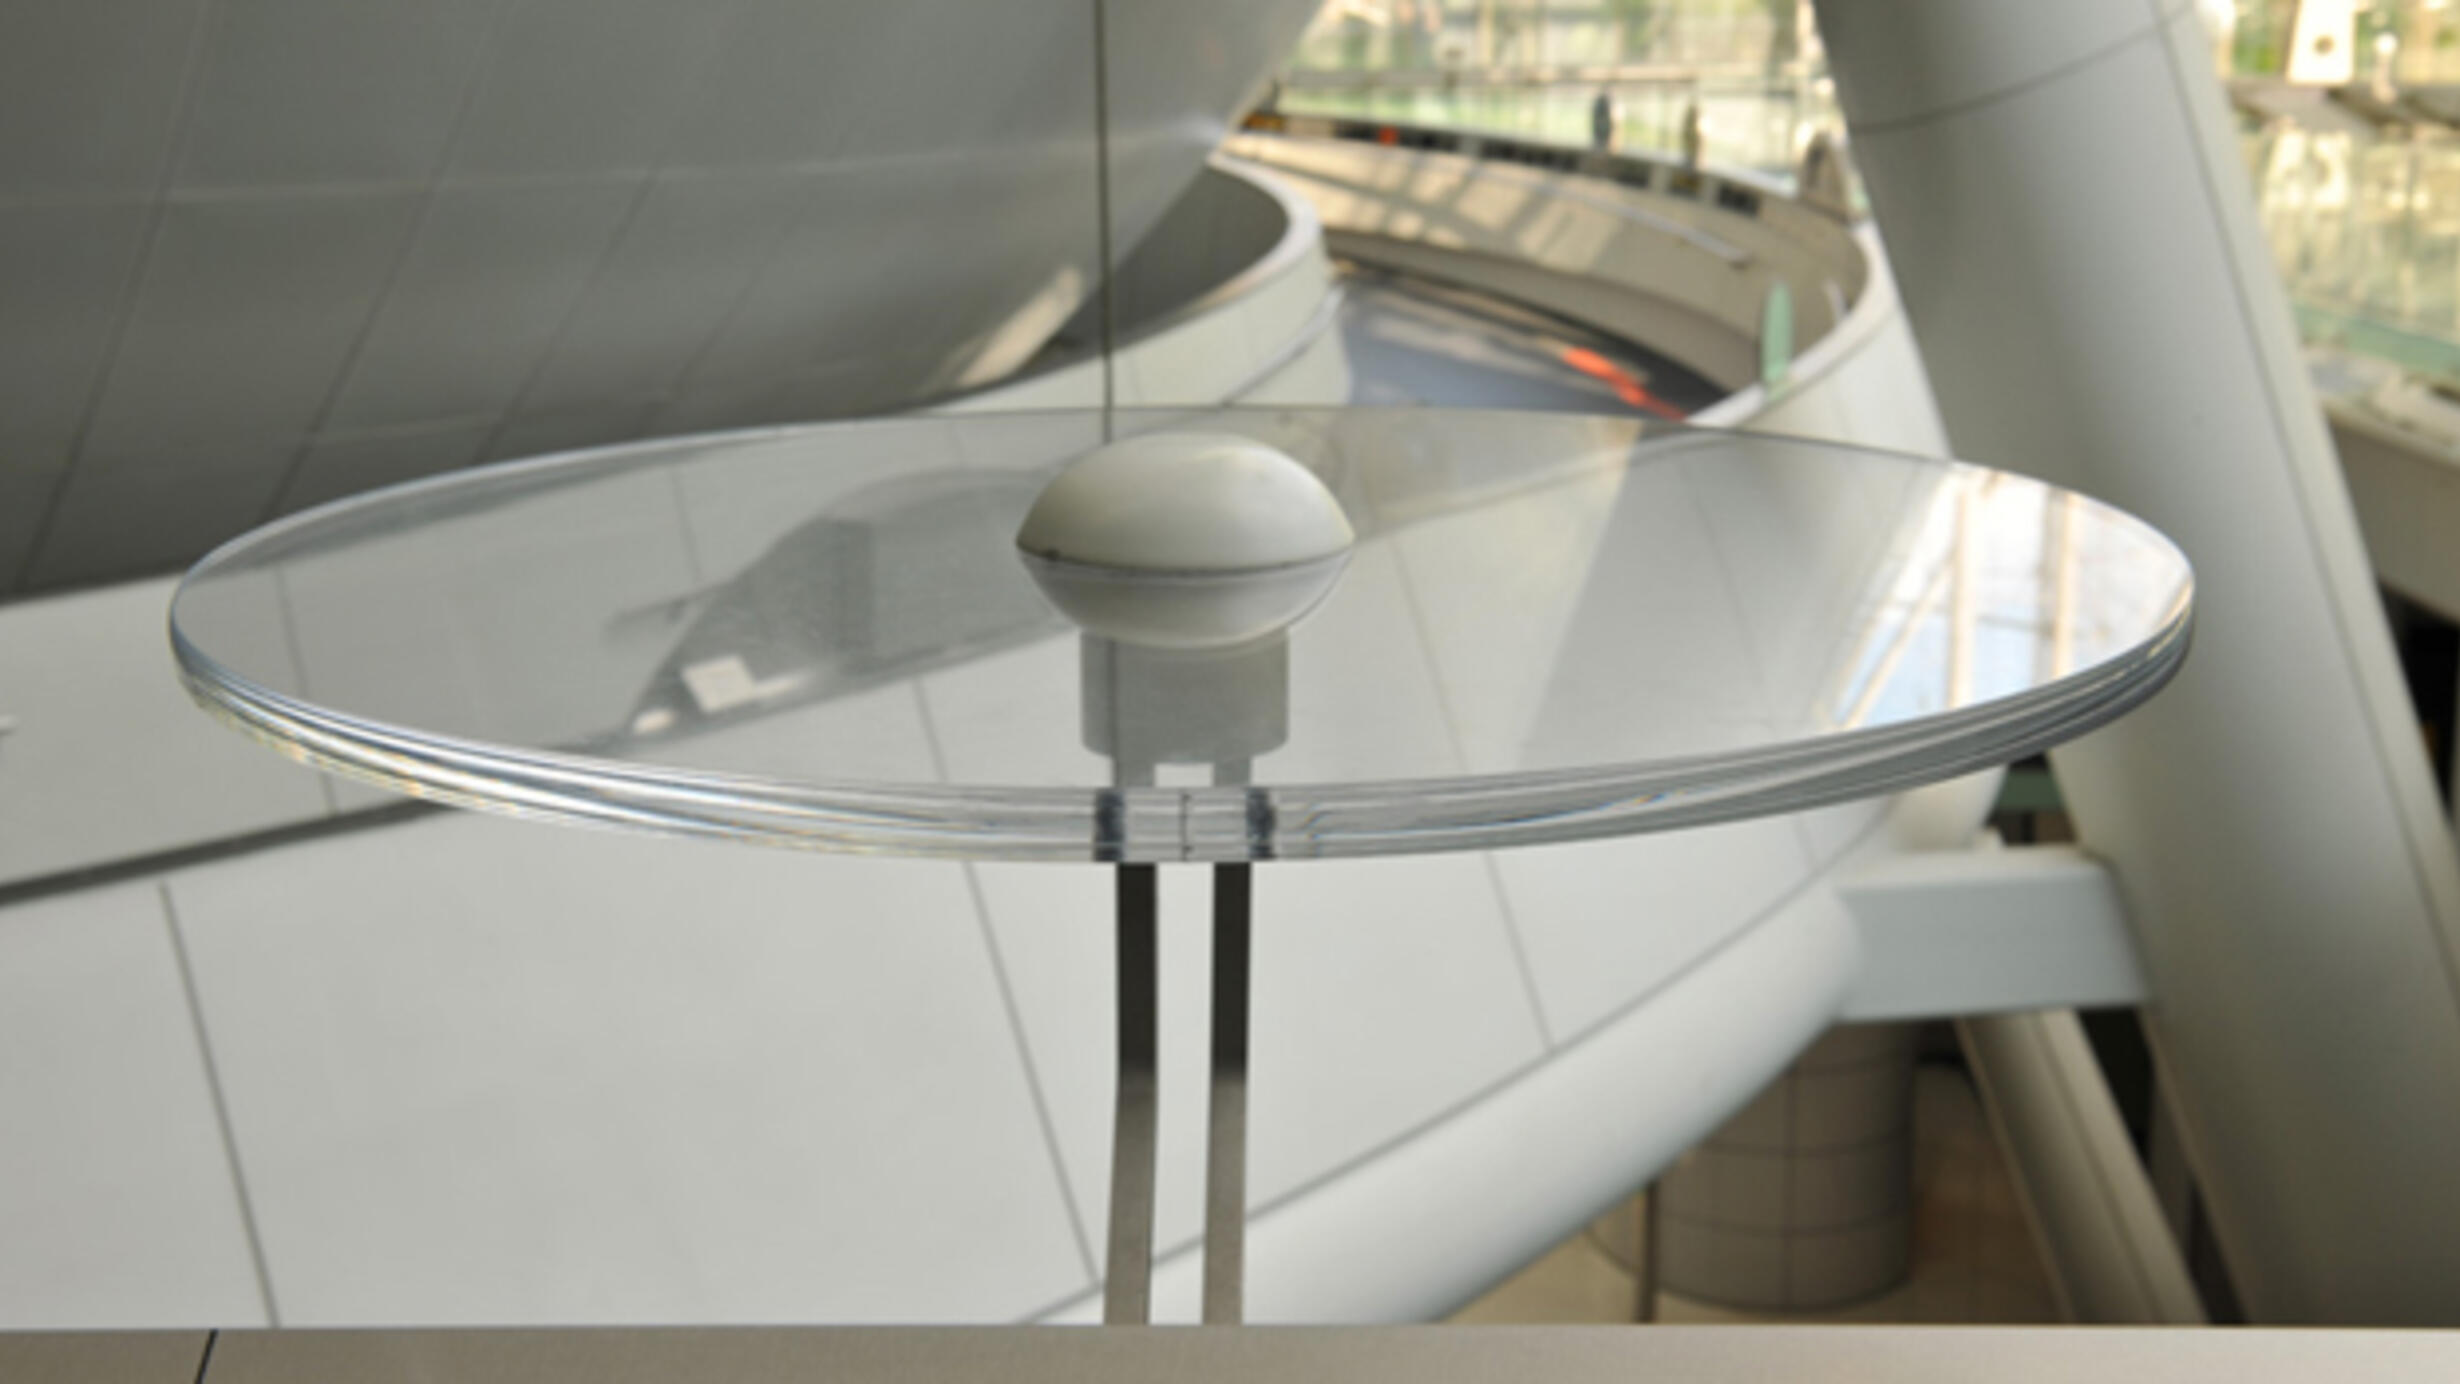 In the Museum’s Rose Center for Earth and Space, a representation of the Milky Way Galaxy composed in part of a disc made of a clear acrylic glass-like material.